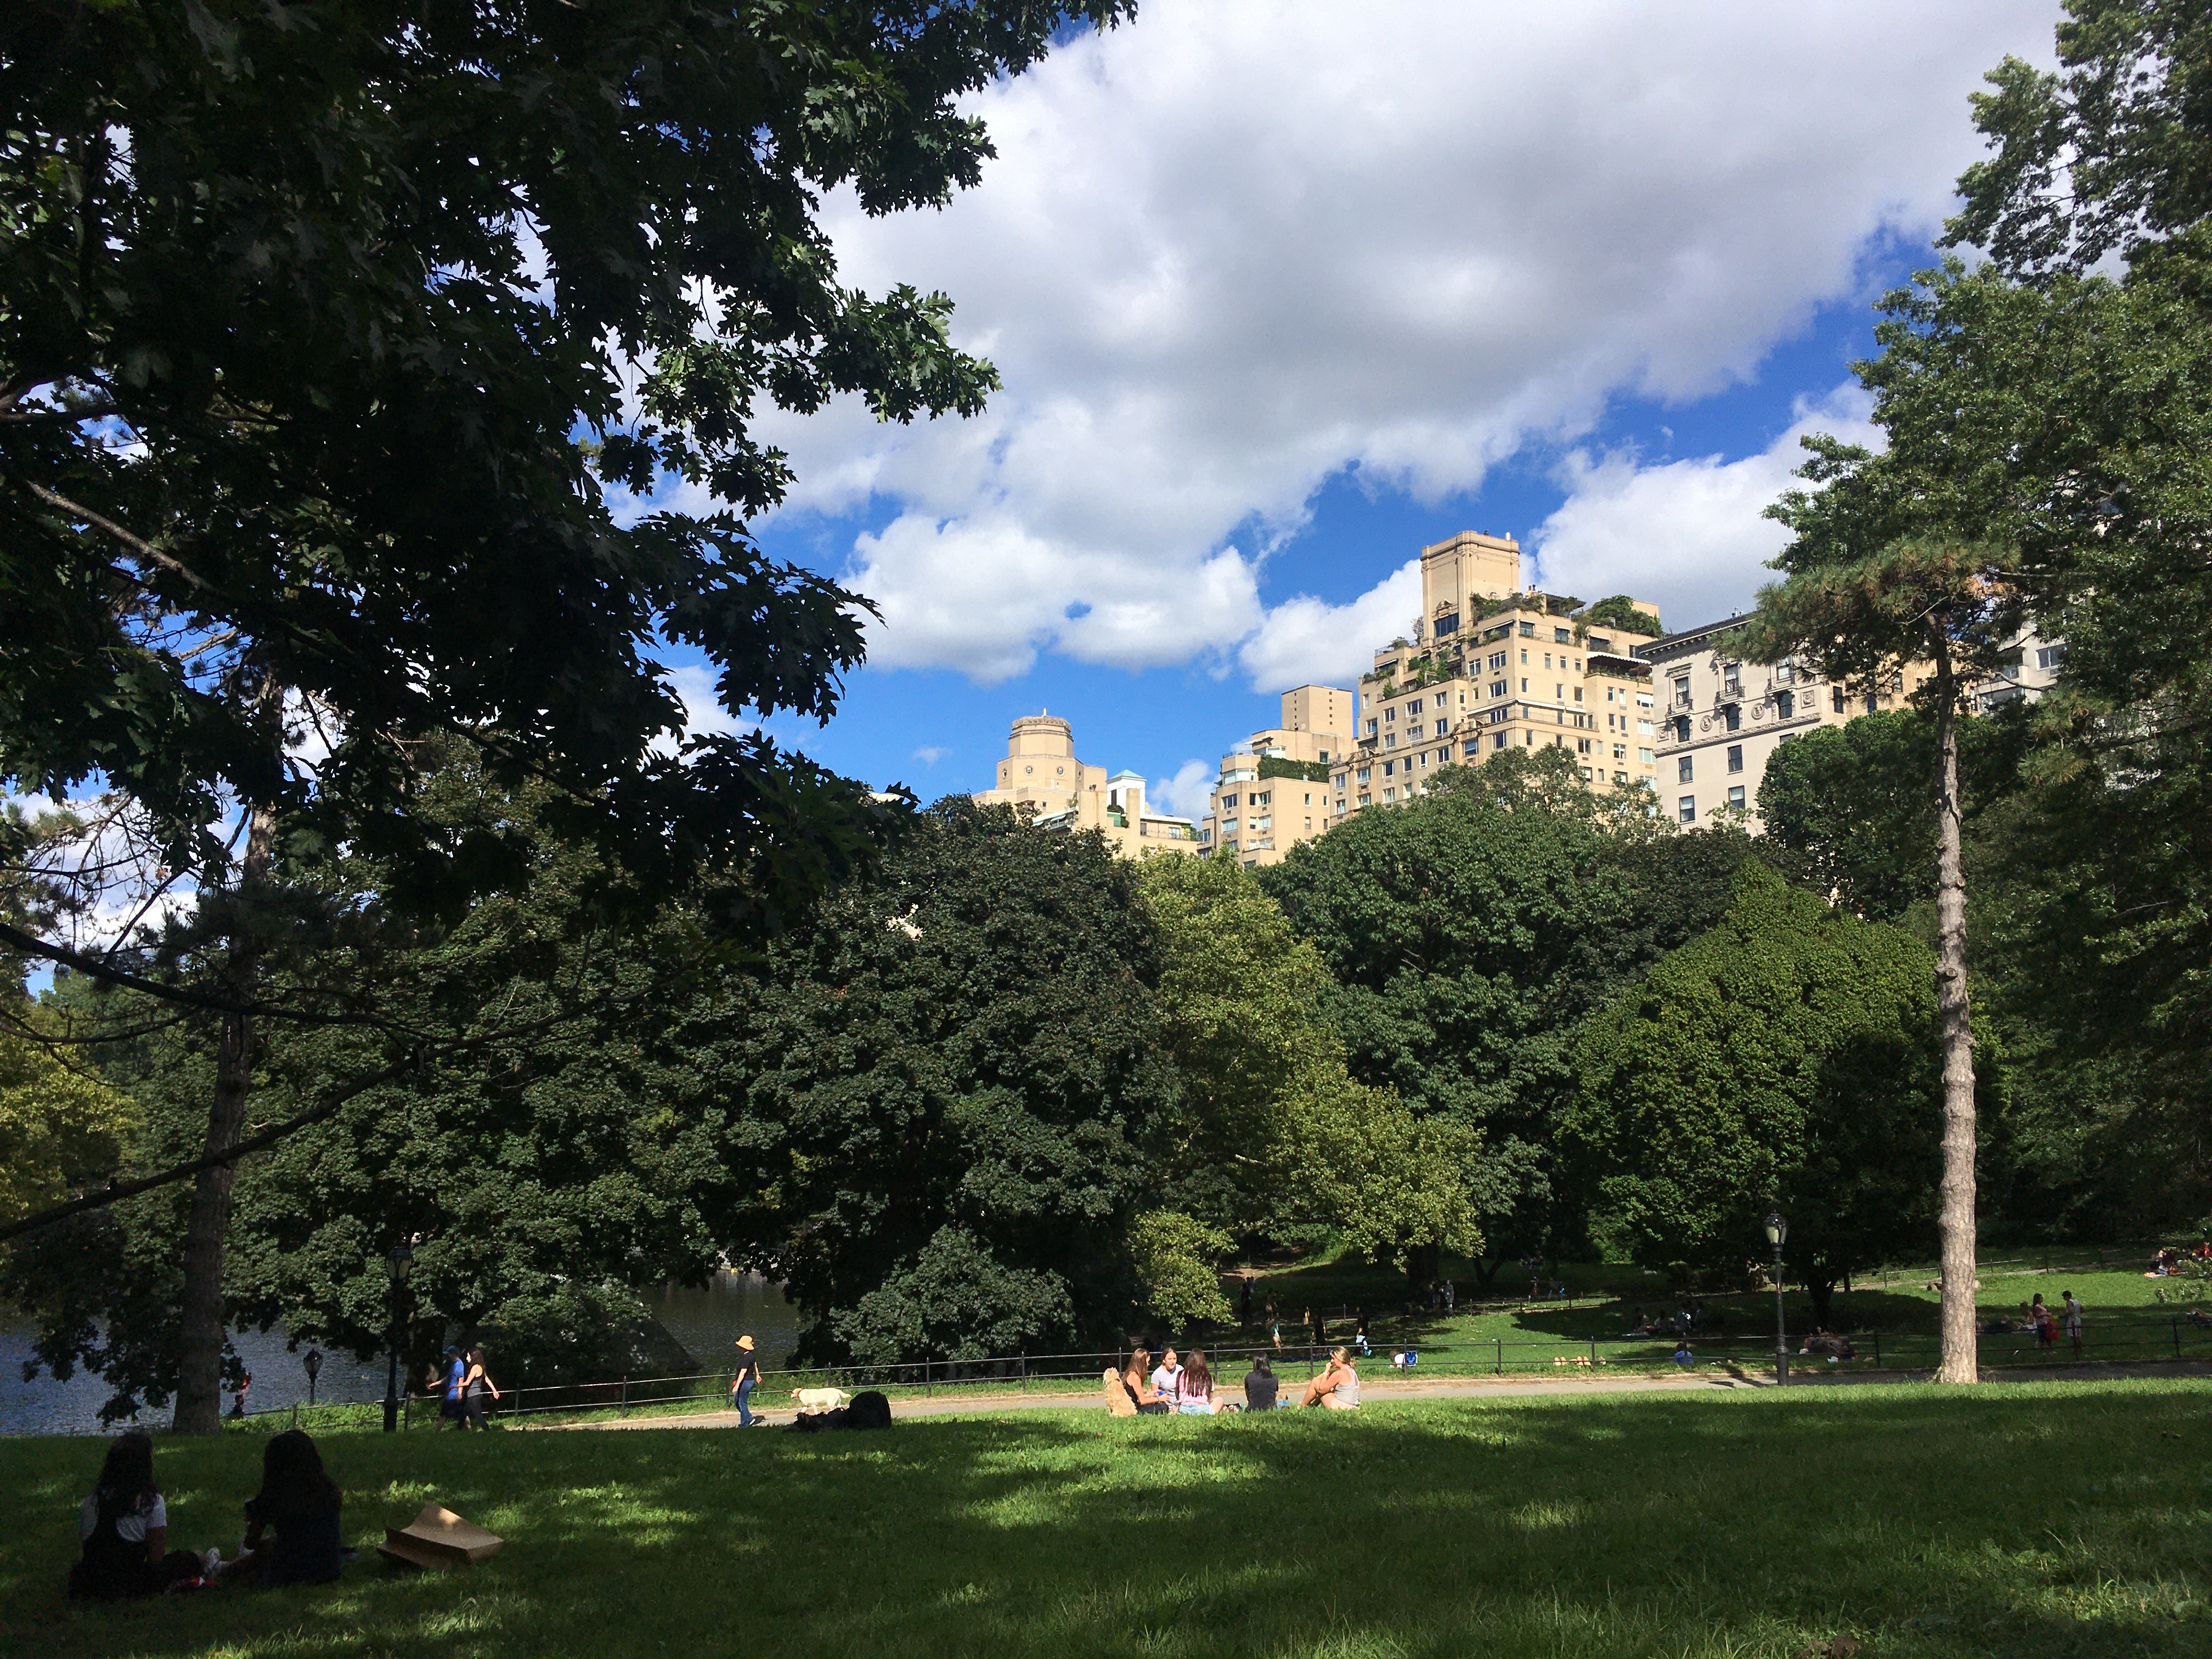 Photograph of Central Park on a beautiful summer day. We can see a few blocky buildings rising up beyond the lush green trees in the middle distance. People sit and stroll through a green-and-blue landscape of lakeside trees and grass.